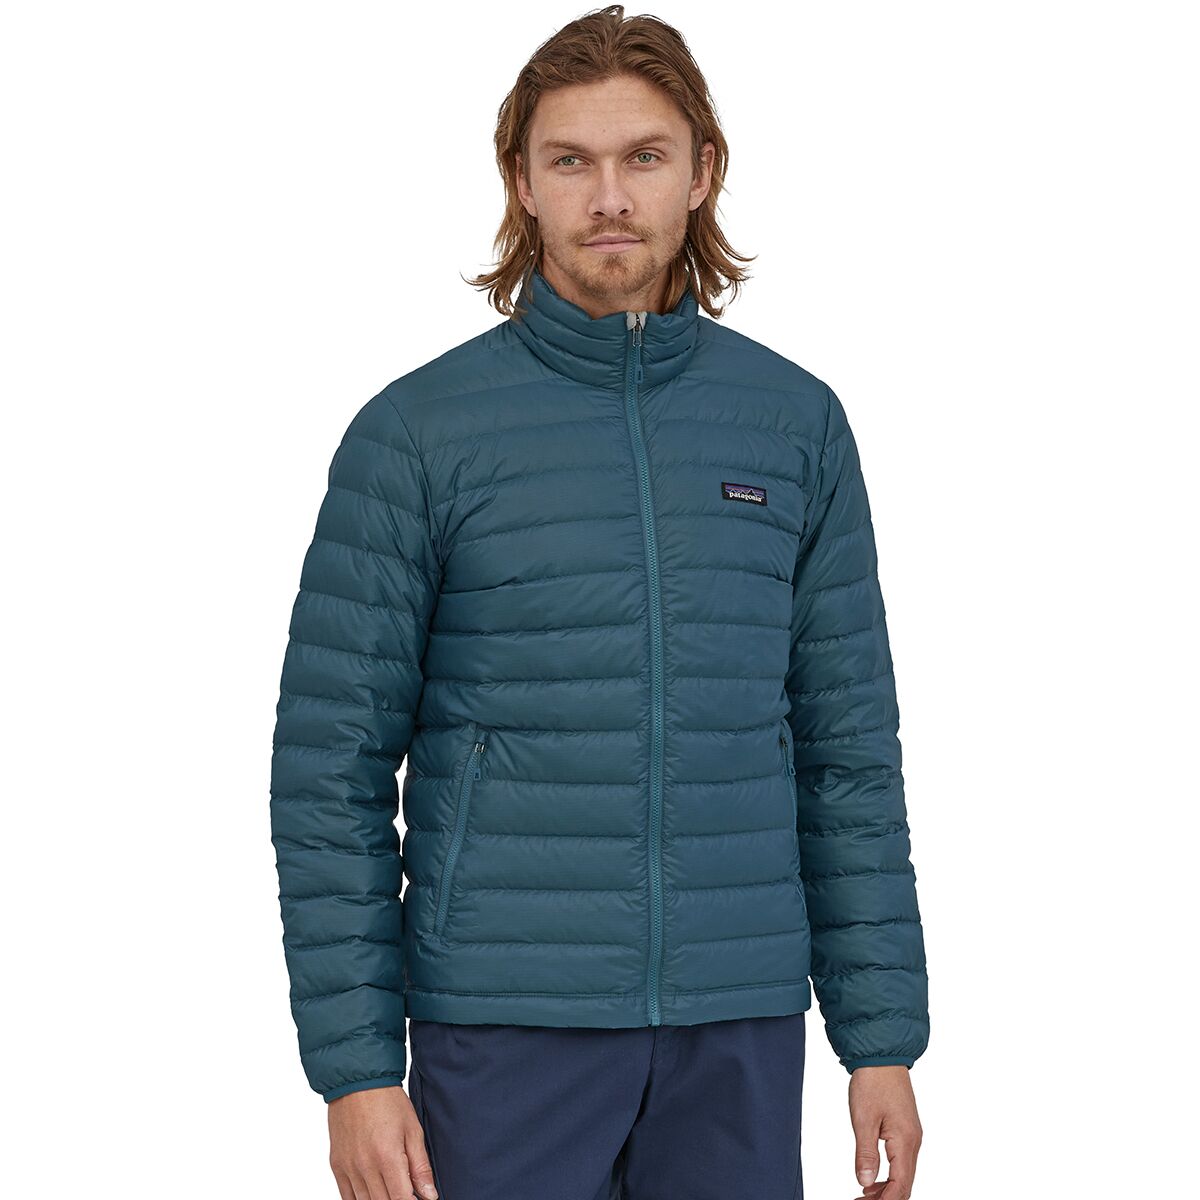 Patagonia Down Sweater Jacket - Men's Abalone Blue L